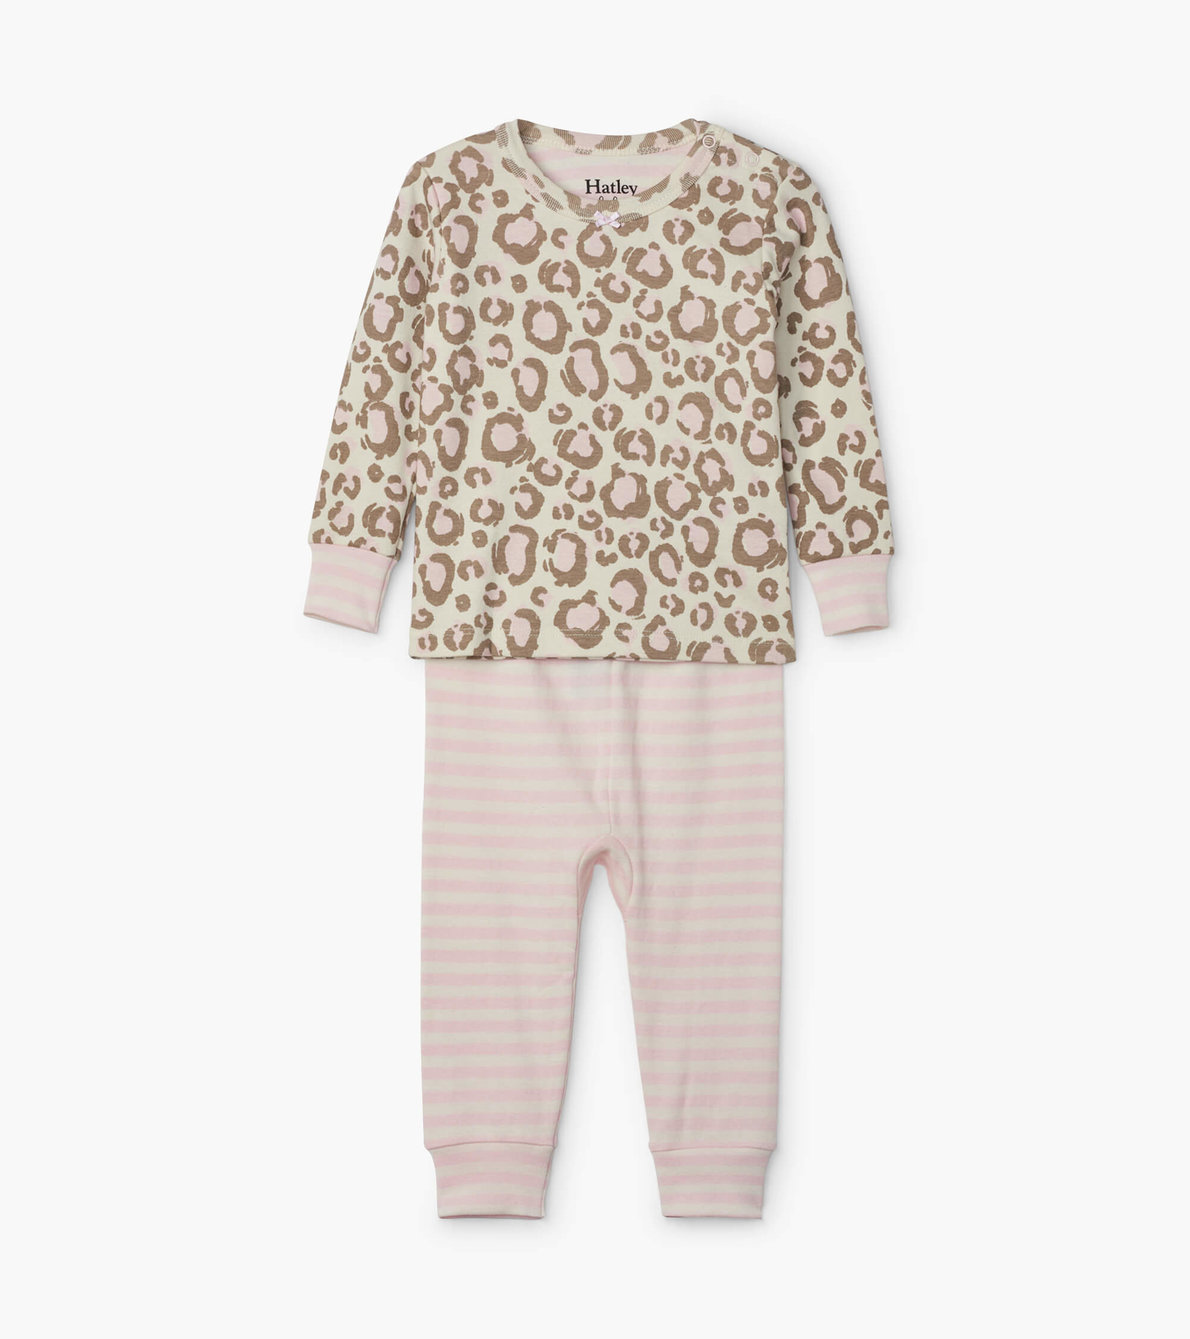 View larger image of Painted Leopard Organic Cotton Baby Pajama Set